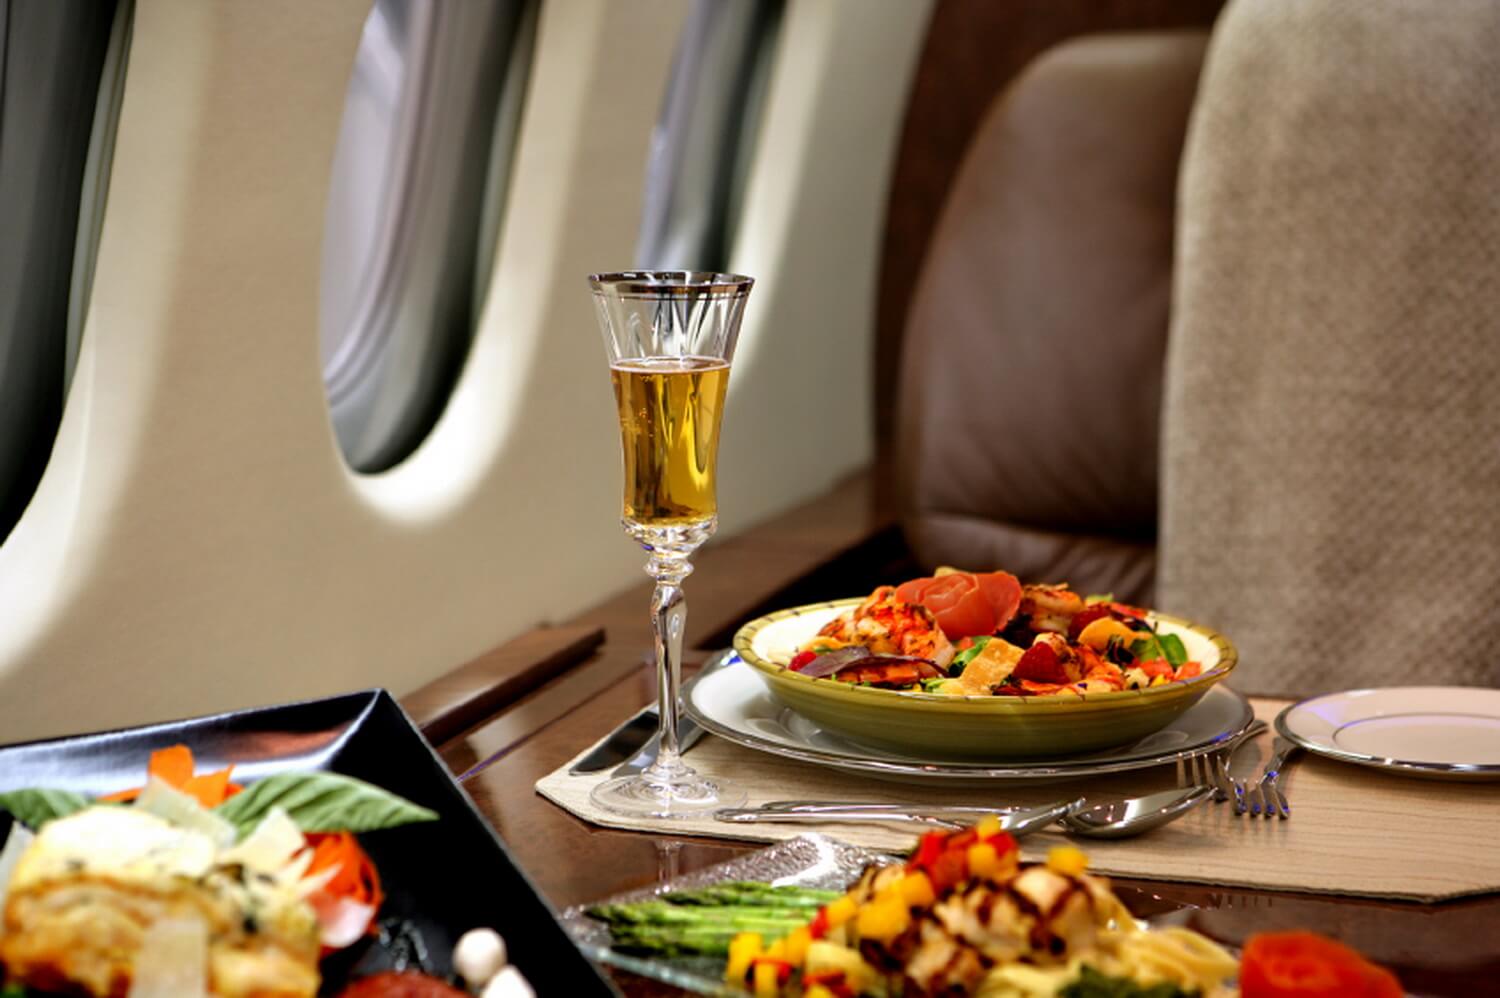 Private jet catering, vip jet catering, in flight private jet food